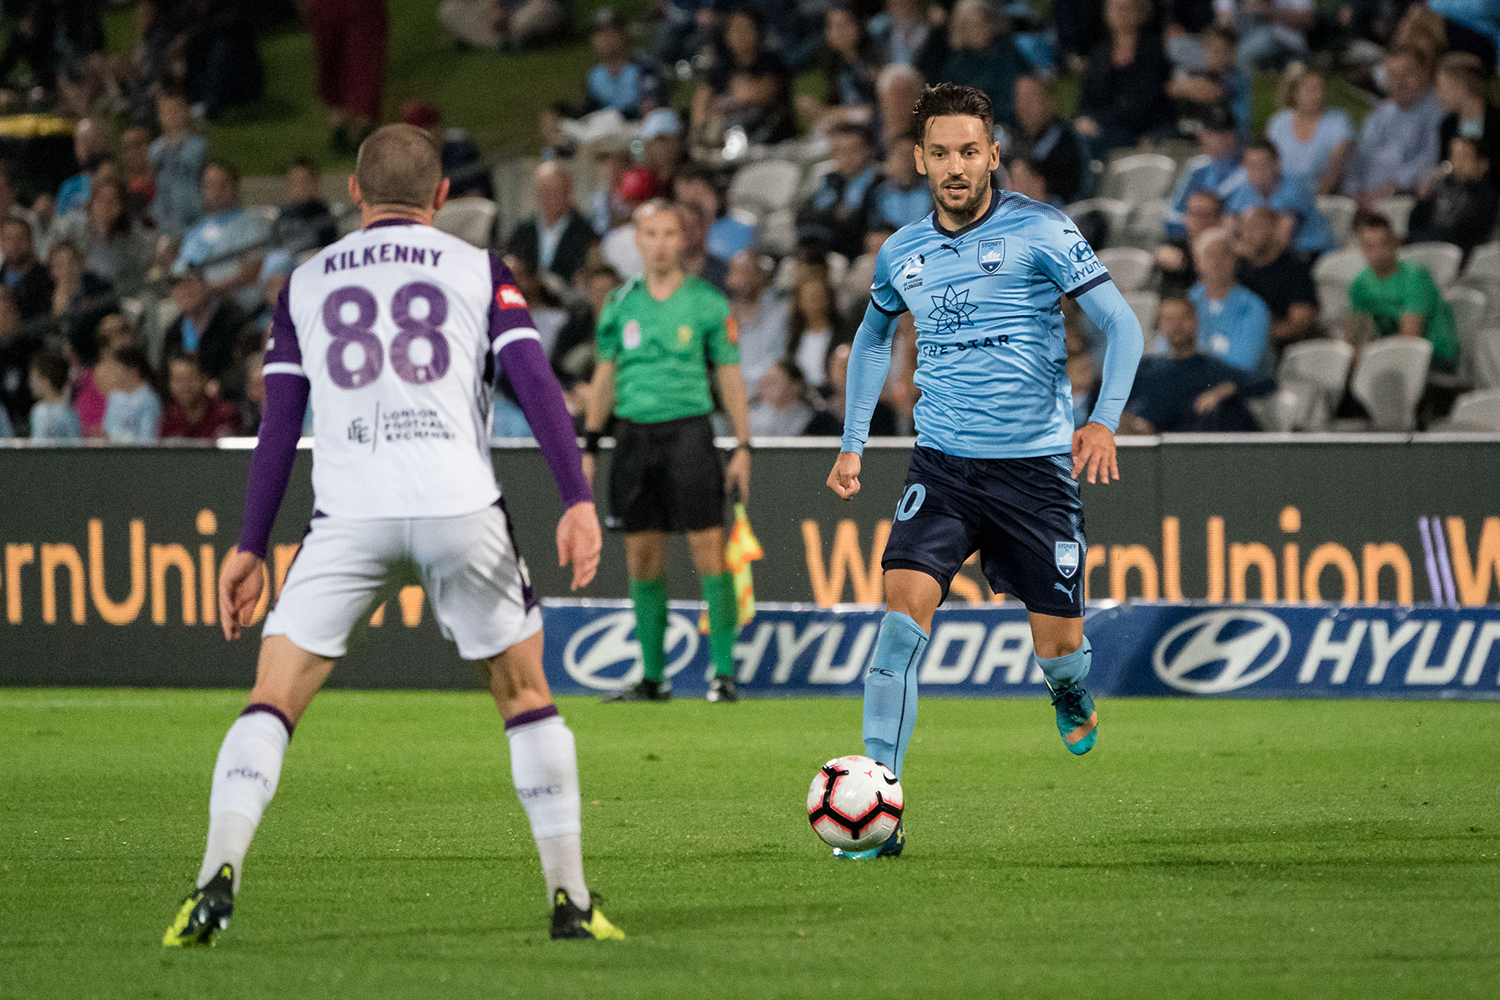 Ninko takes on the Perth defence